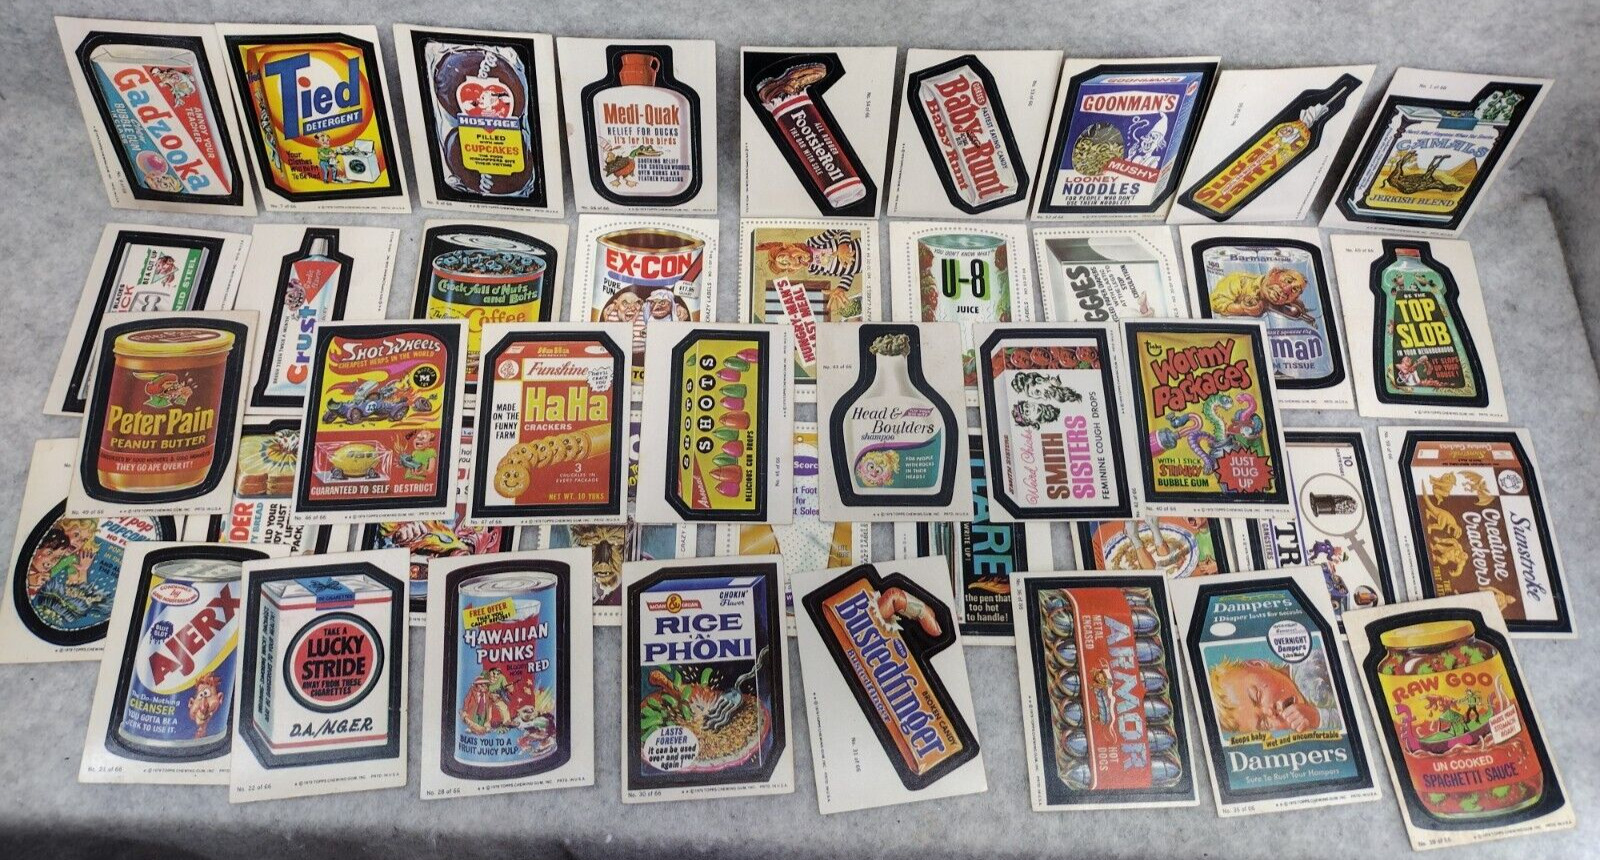 42) 1979 Topps Fleer Wacky Packages Crazy Labels Sticker Cards